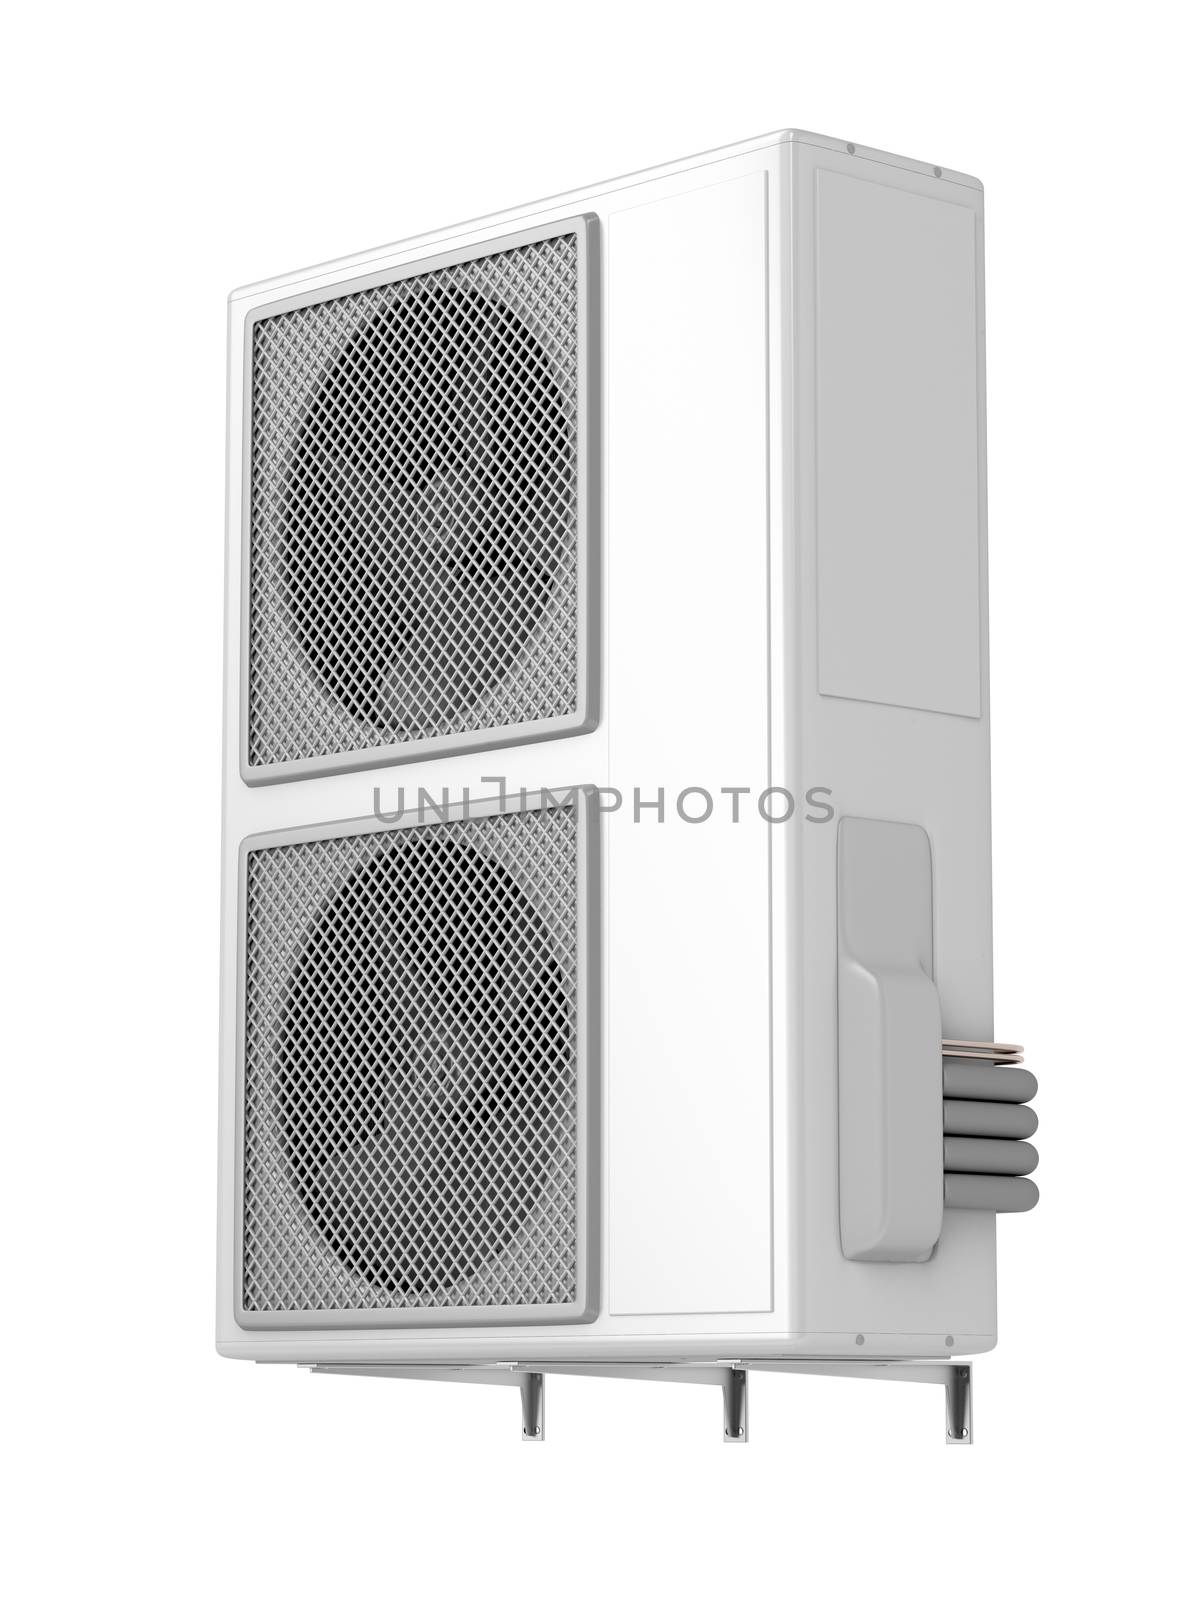 Outdoor unit of central air conditioner, isolated on white 